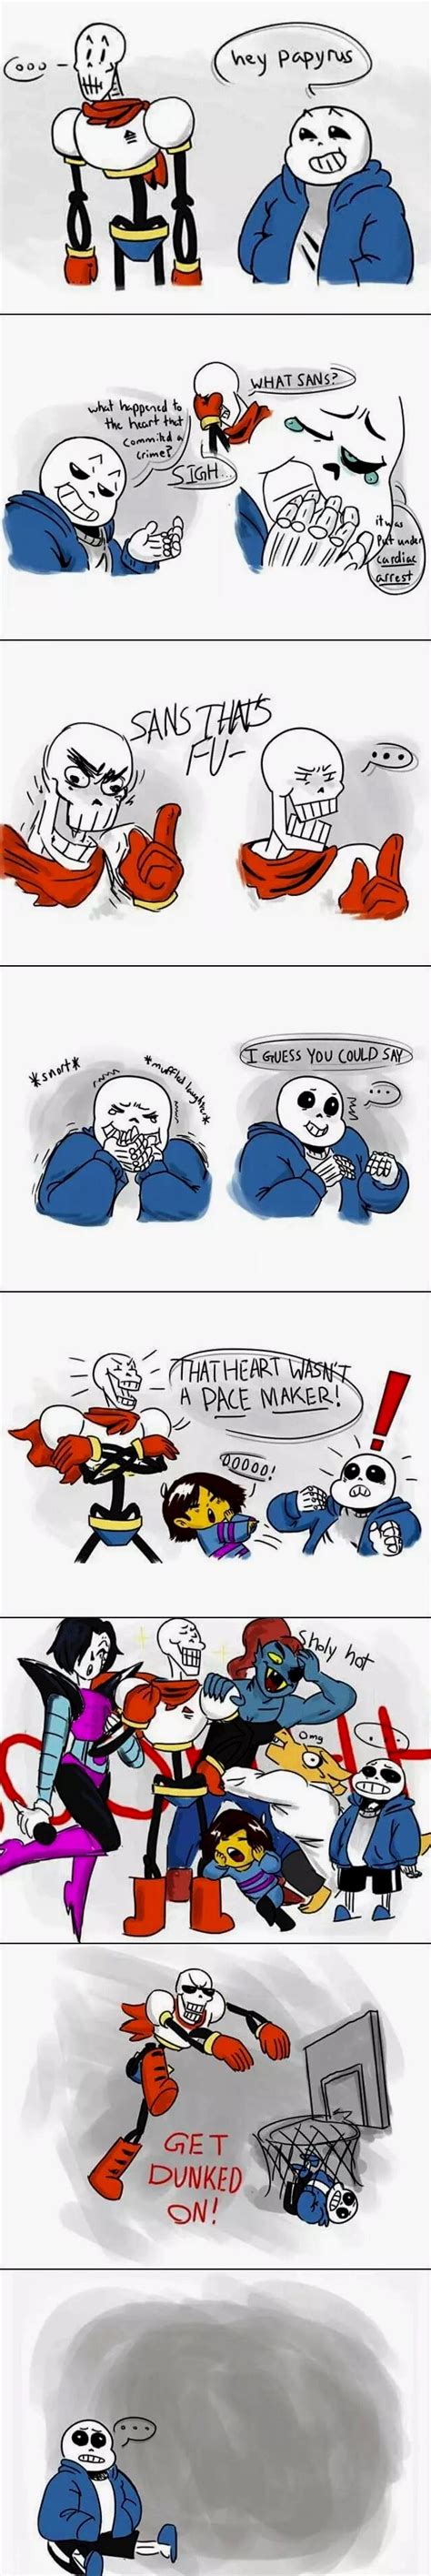 sans gets pun by papyrus get dunked on undertale undertale undertale comic funny frisk sans